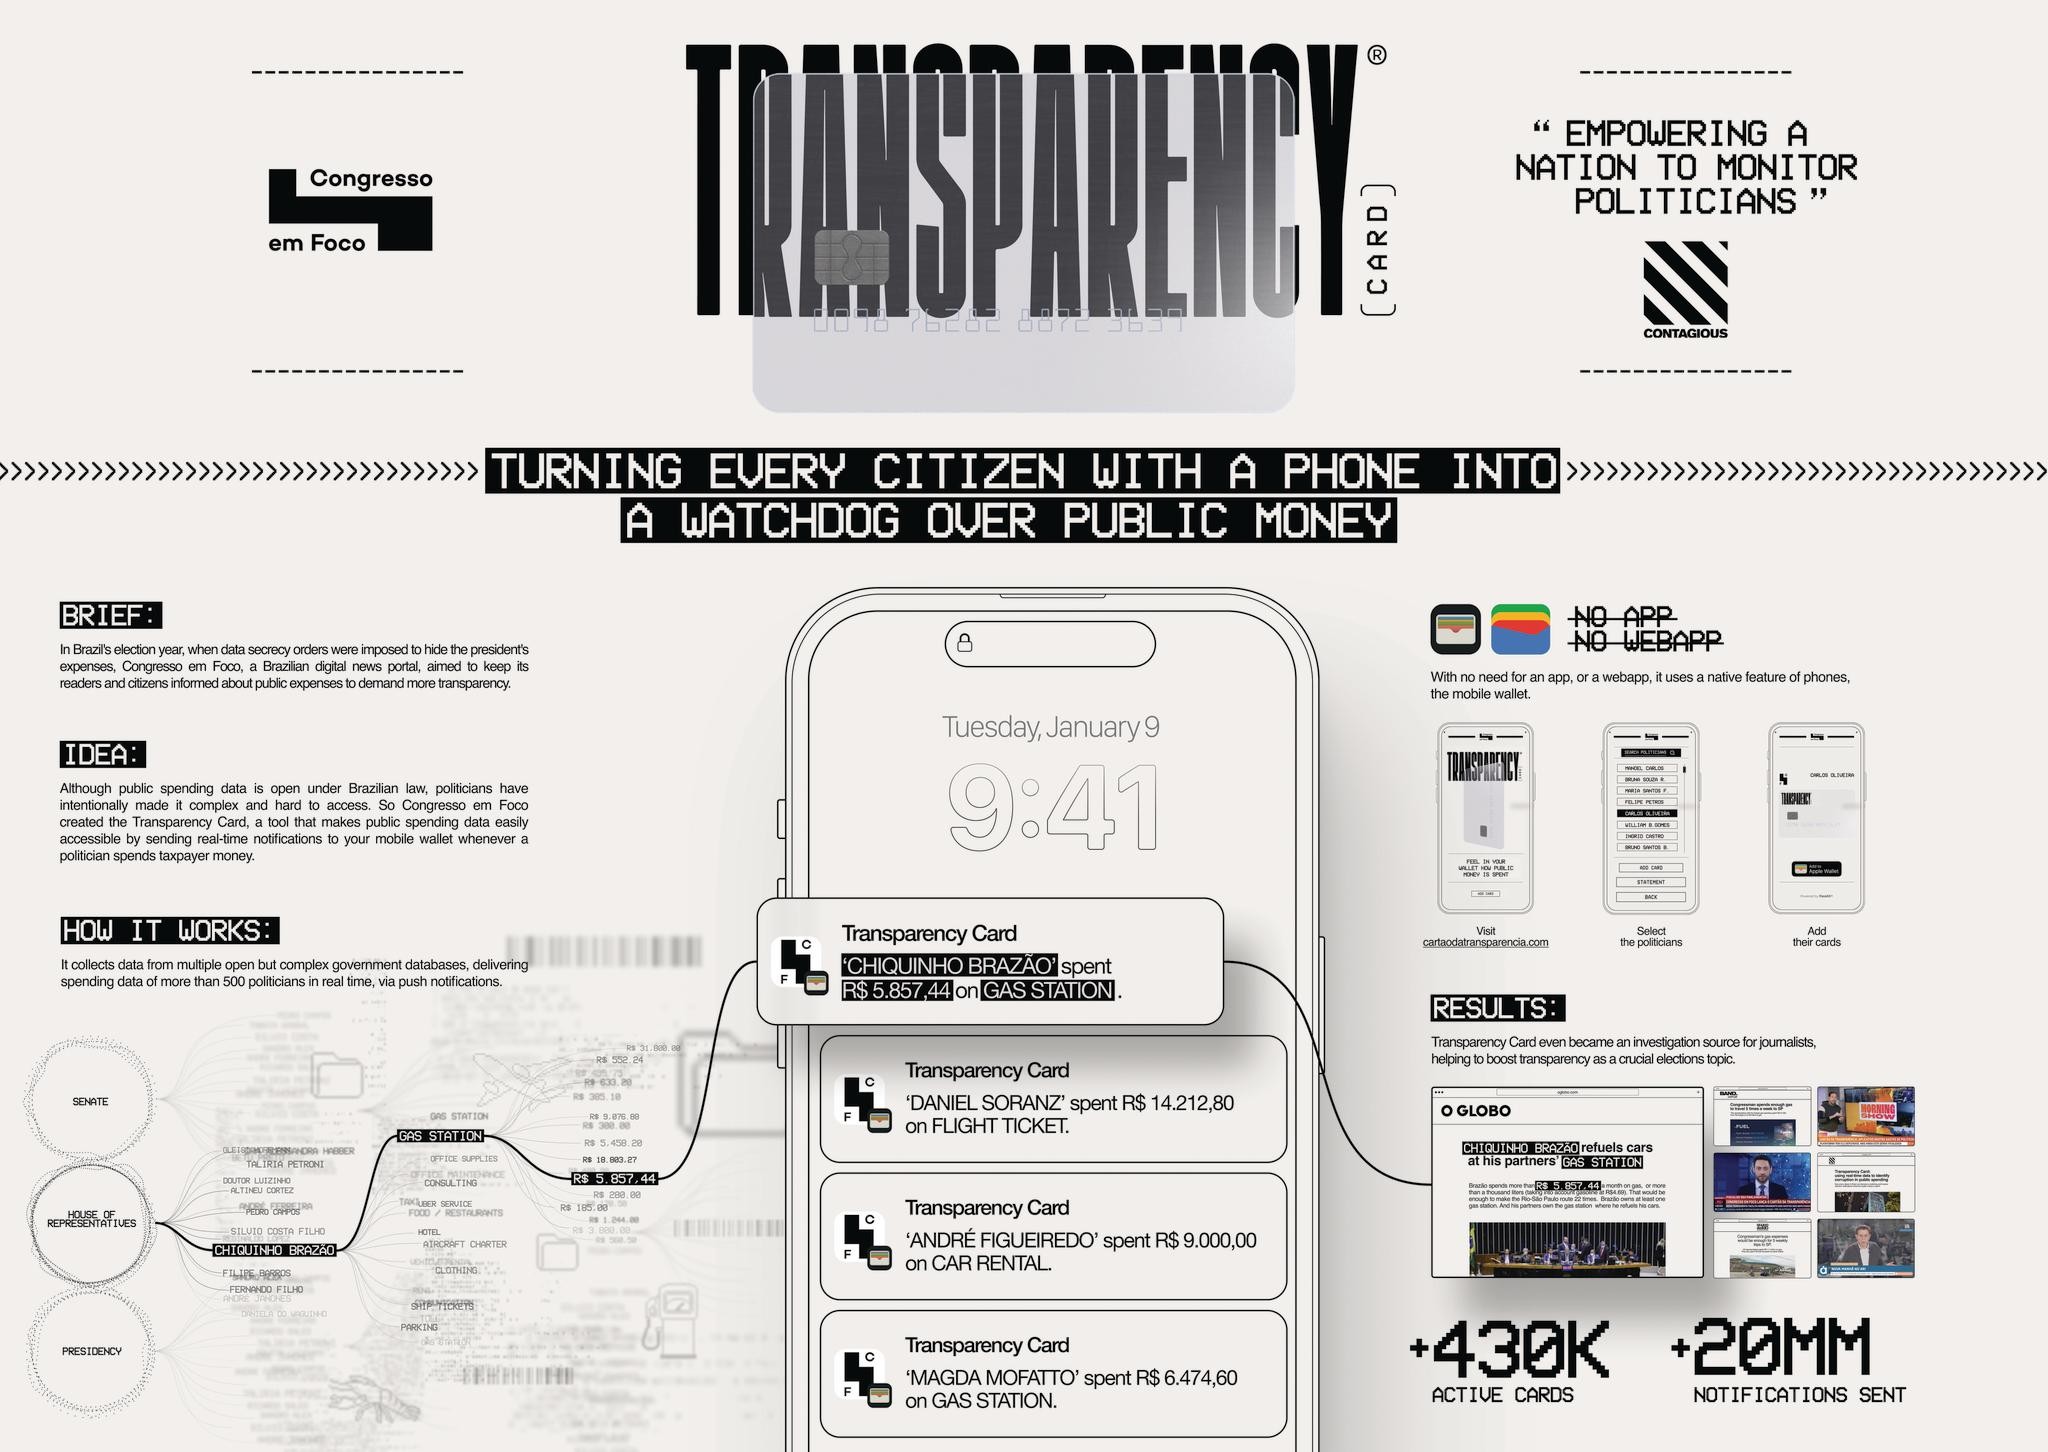 TRANSPARENCY CARD